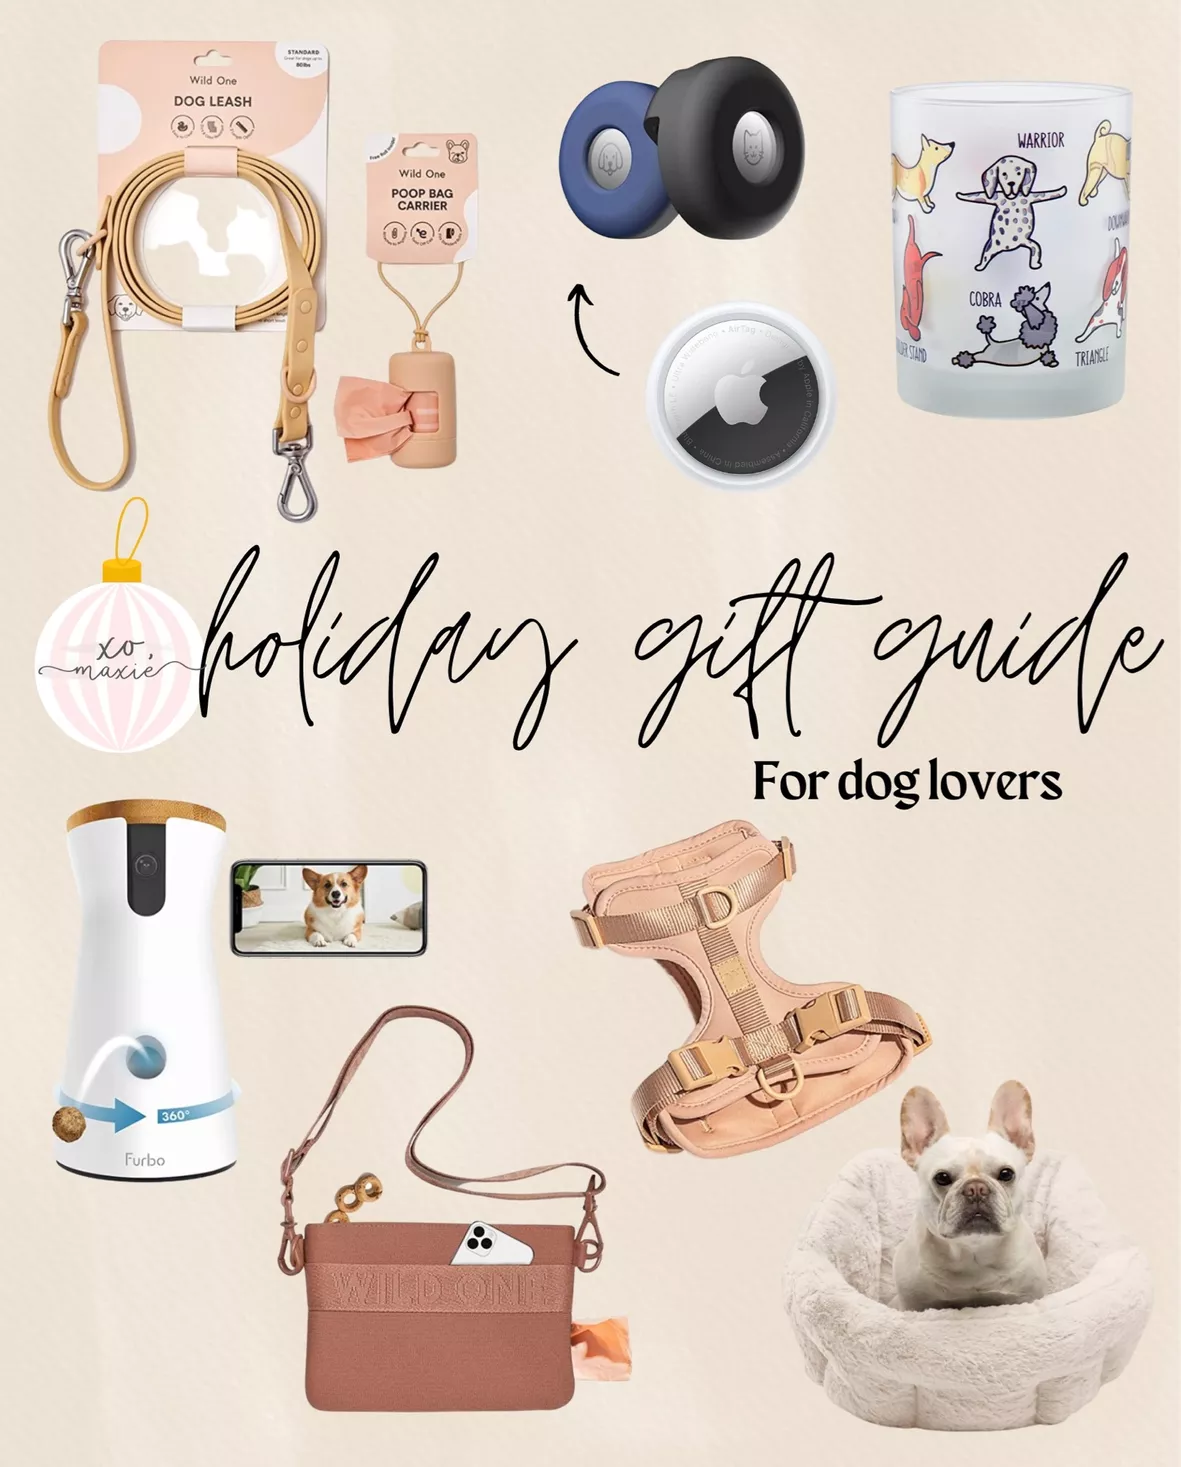 Great Holiday Gifts for Dogs and Cats